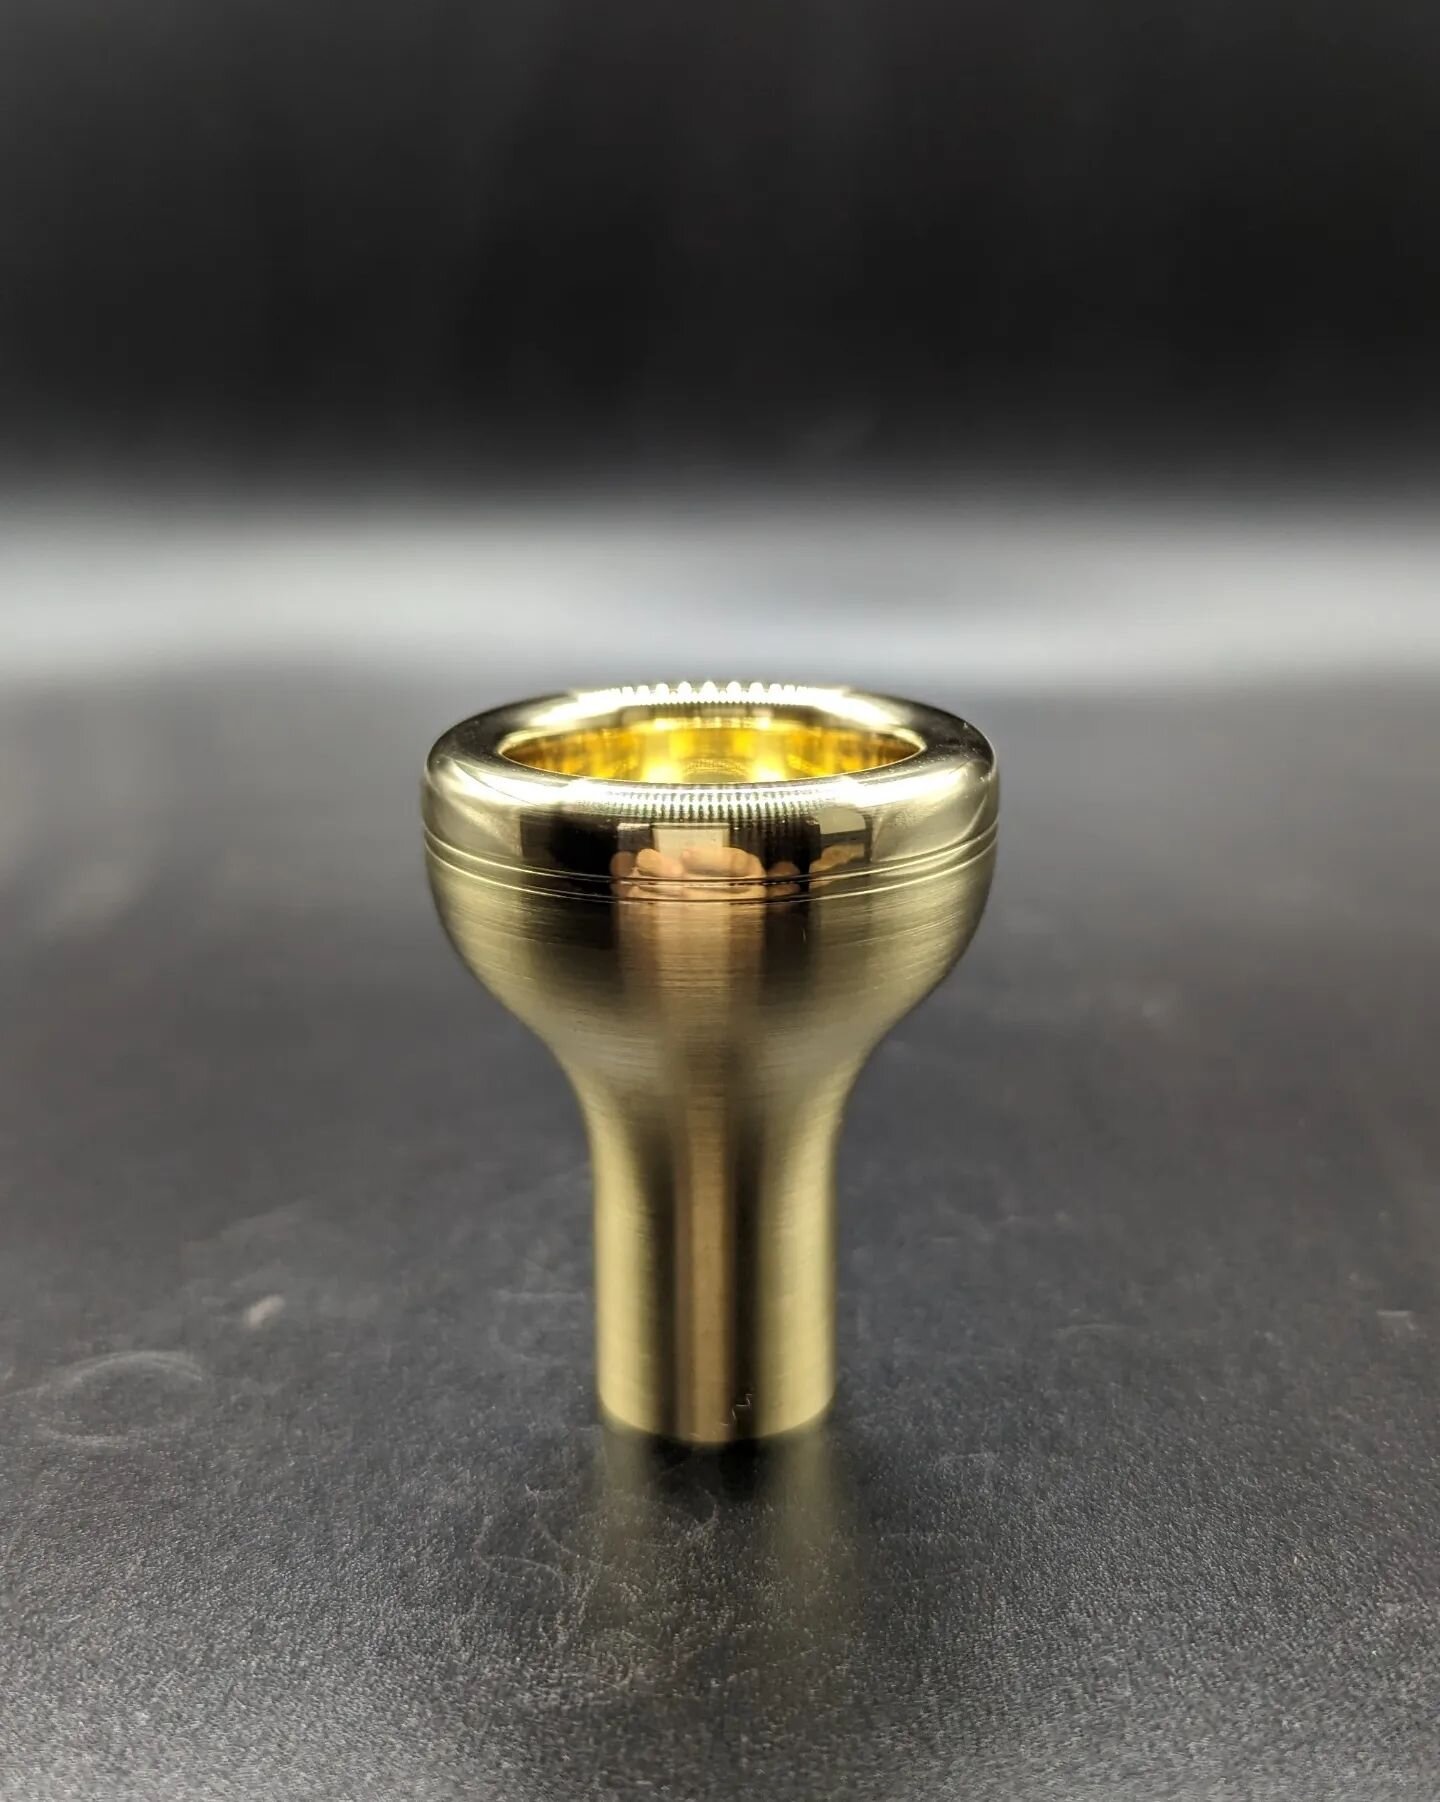 Here's a few bass trombone mouthpieces that need a home. Normally $264 for silver plate and $339 for gold plate, take these guys for $199 in silver, or $275 in gold.

Specs are:

800T
28mm ID, .240&quot; rim width, .310 throat Medium weight

900XT
29